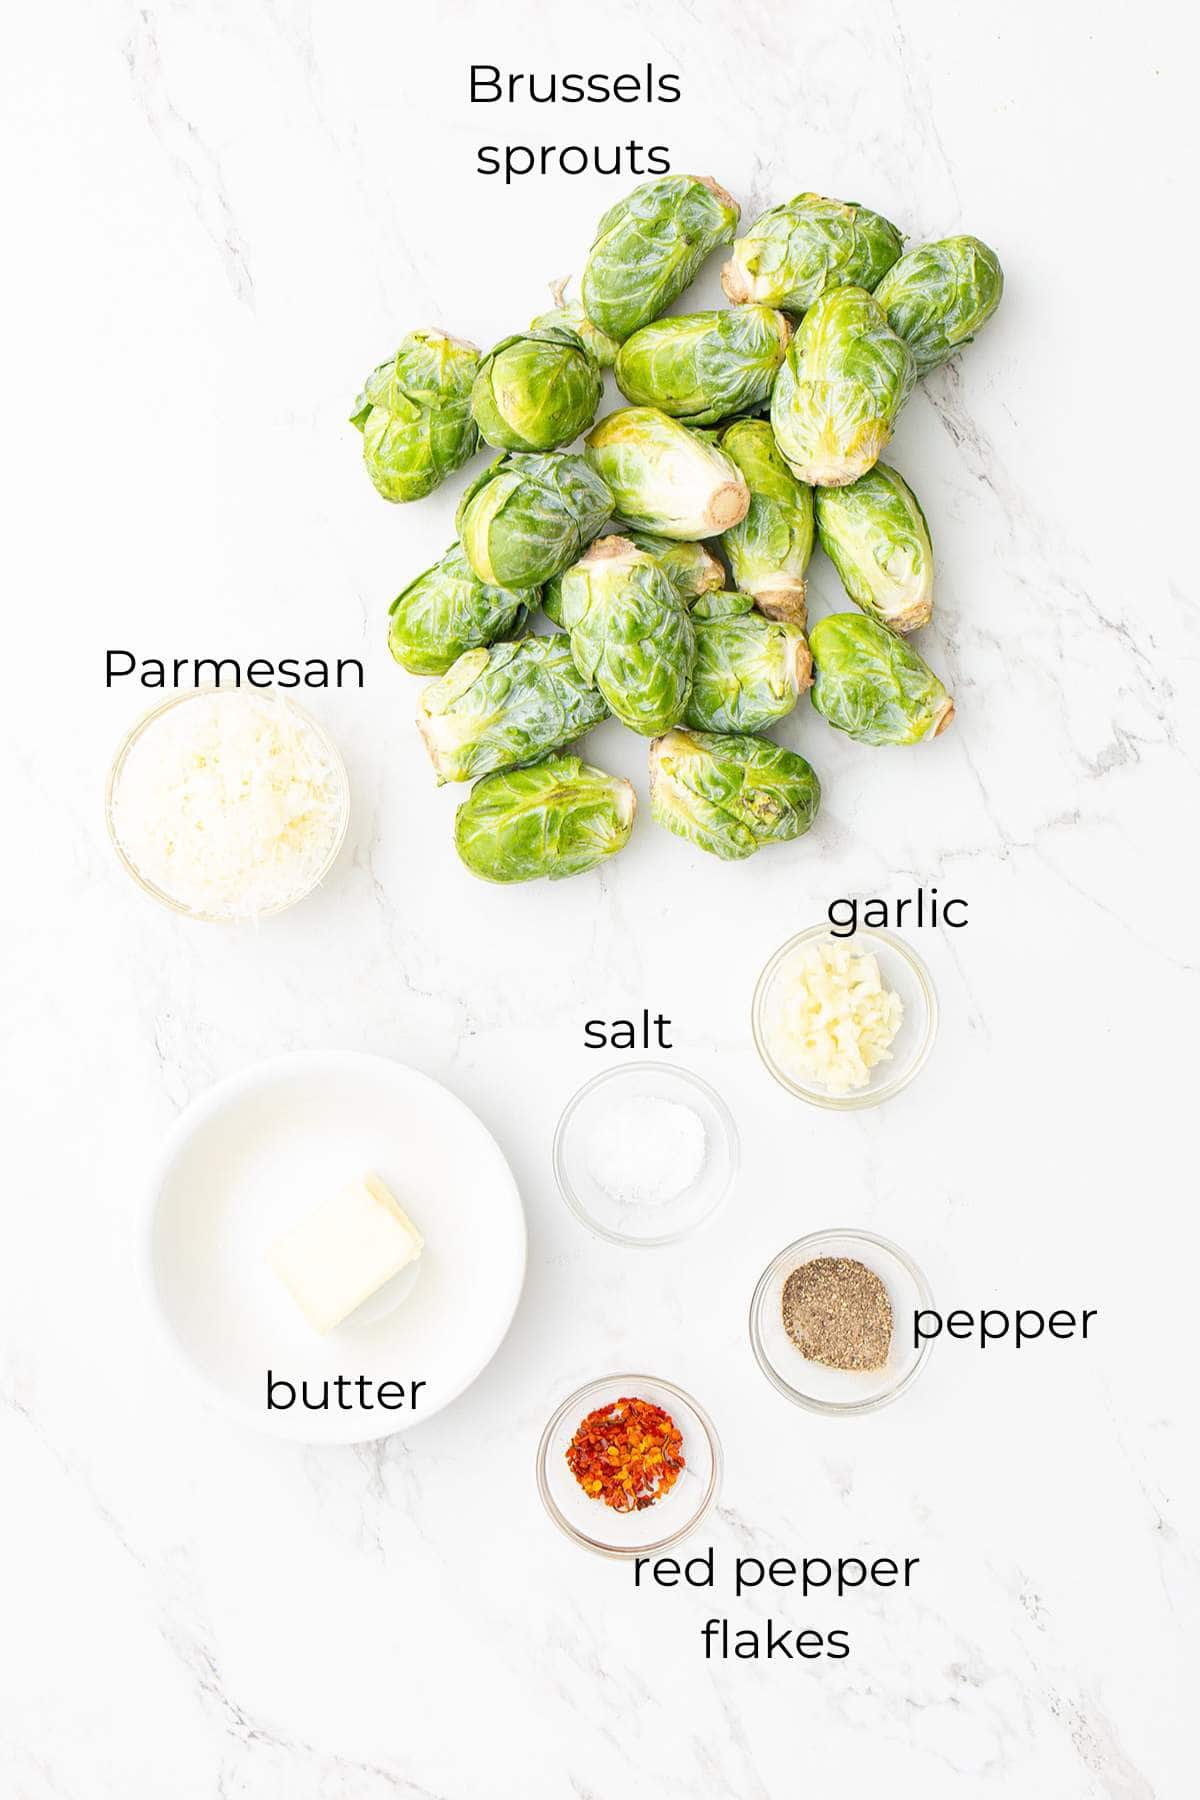 Top down image of ingredients for Air Fryer Brussels sprouts.